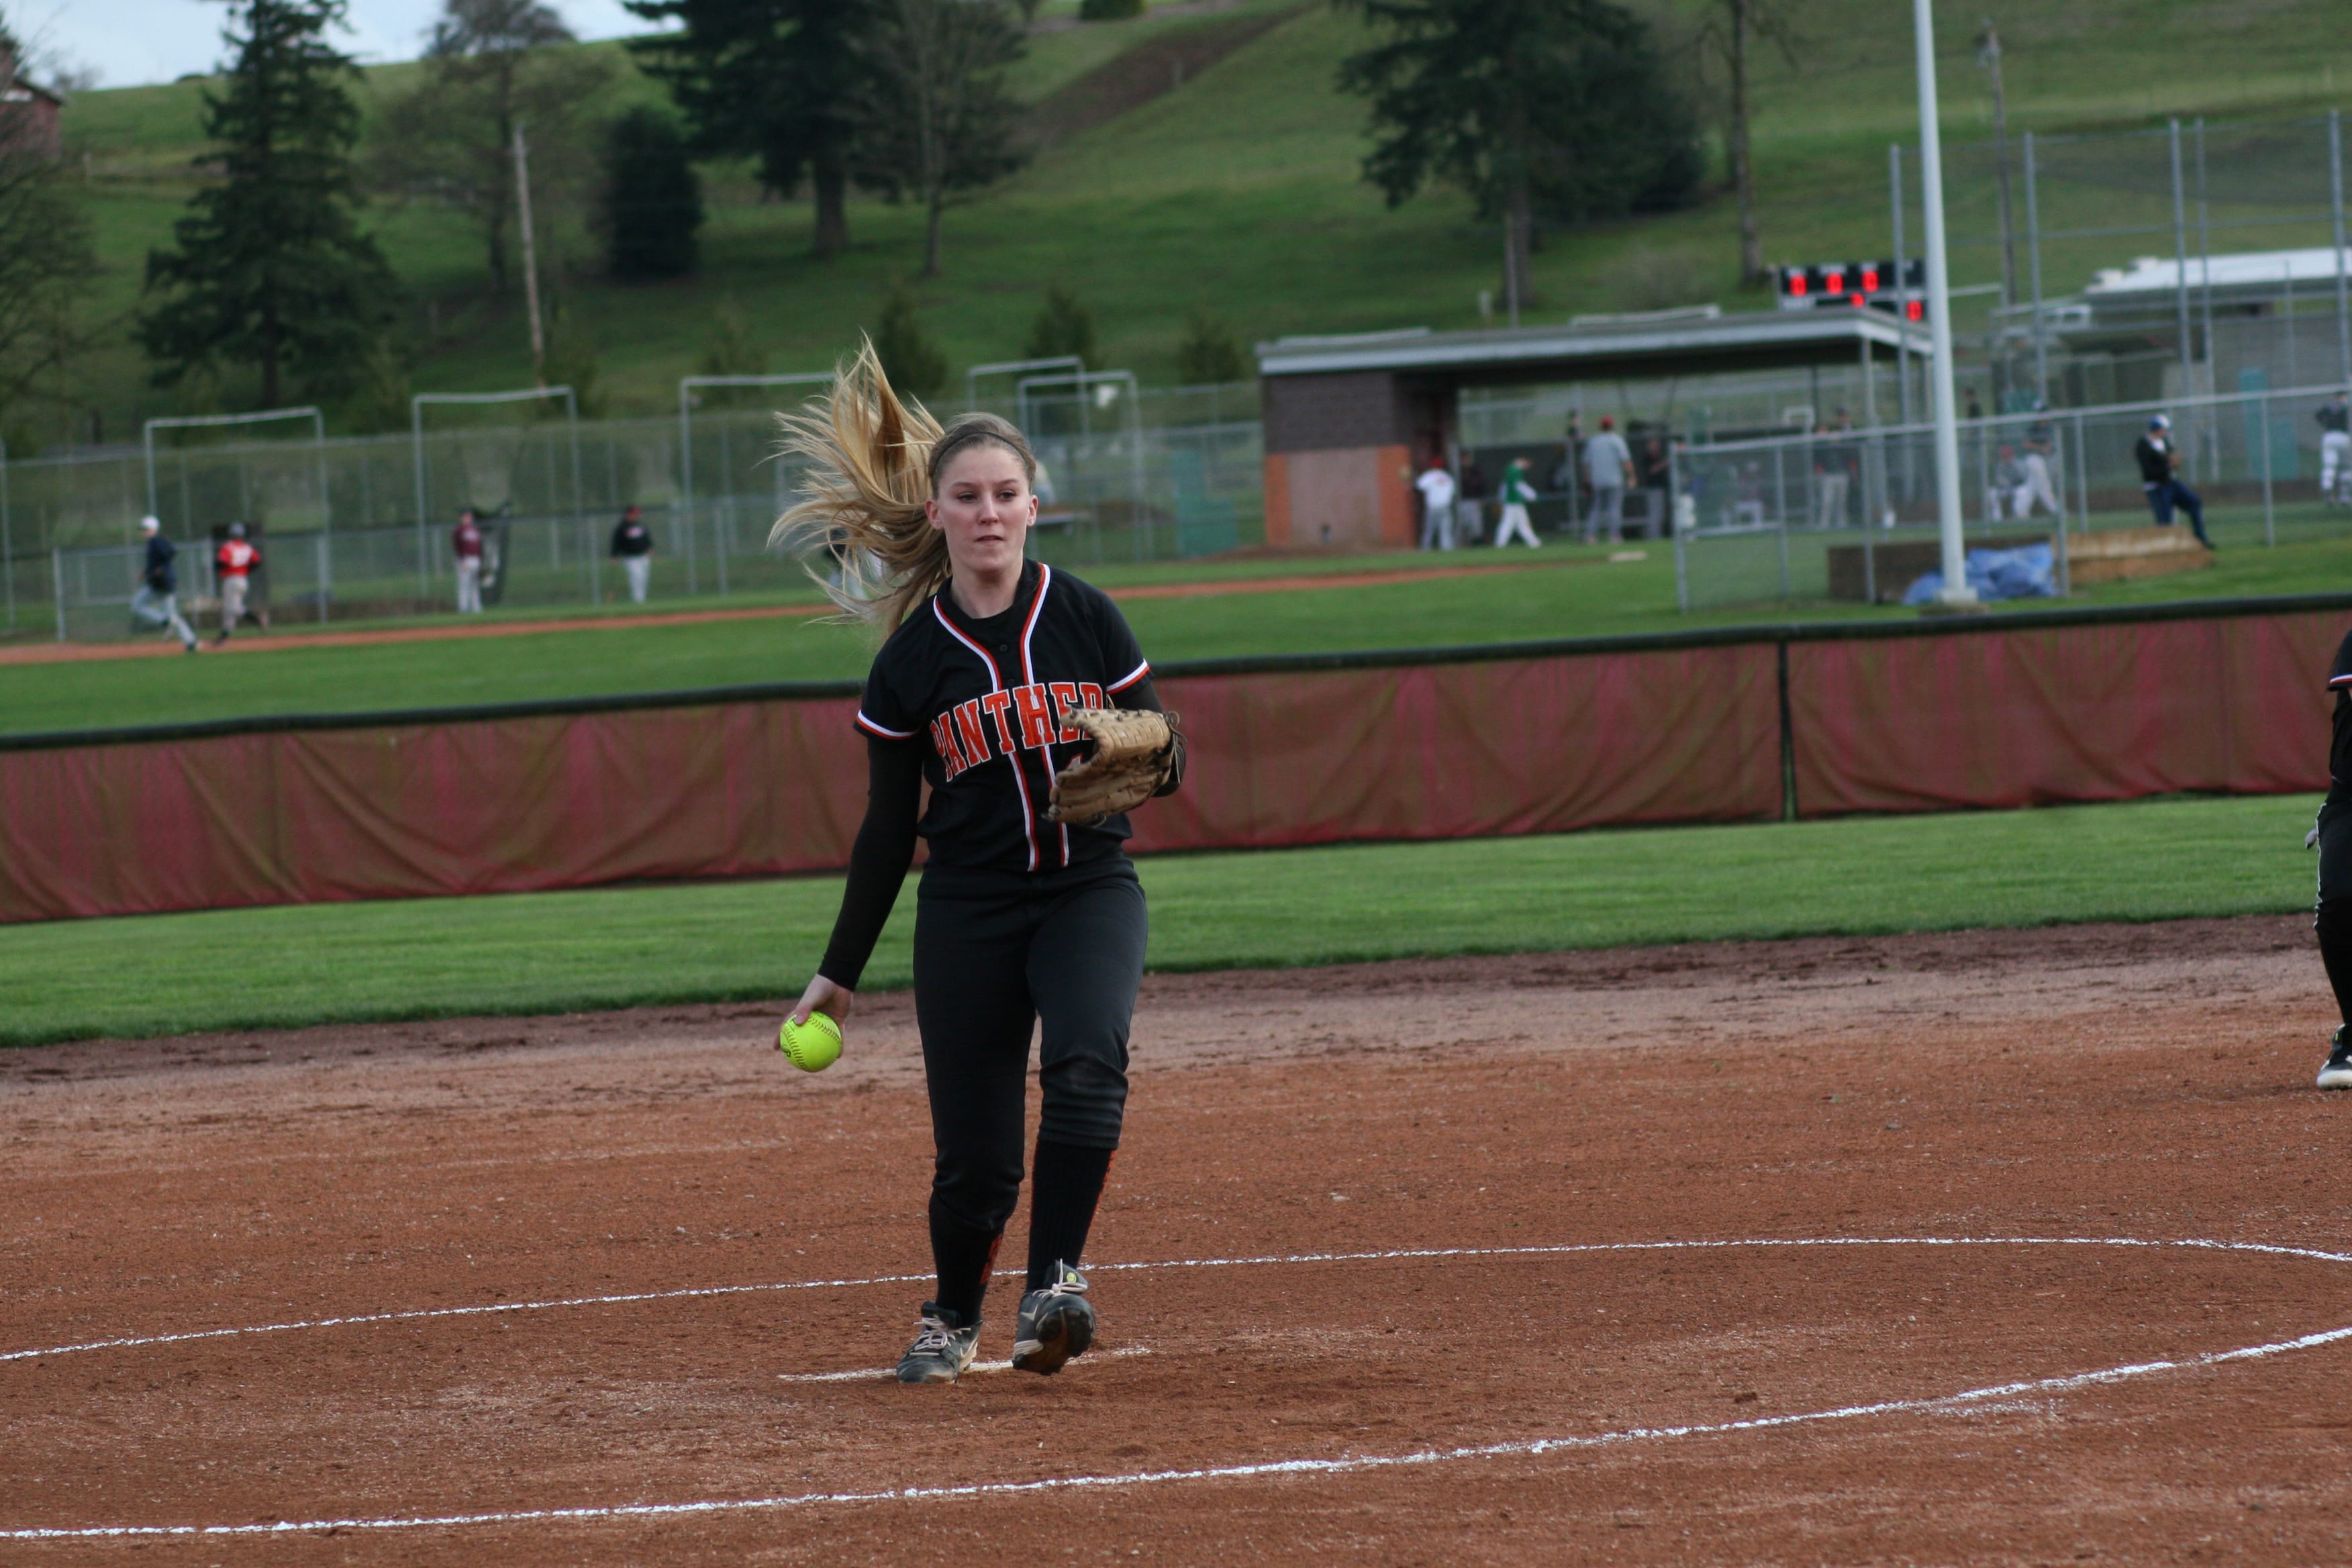 Courtney Shelley pitched seven shut out innings for Washougal and earned the victory after Becca Bennett knocked in the winning run in the bottom of the seventh inning.